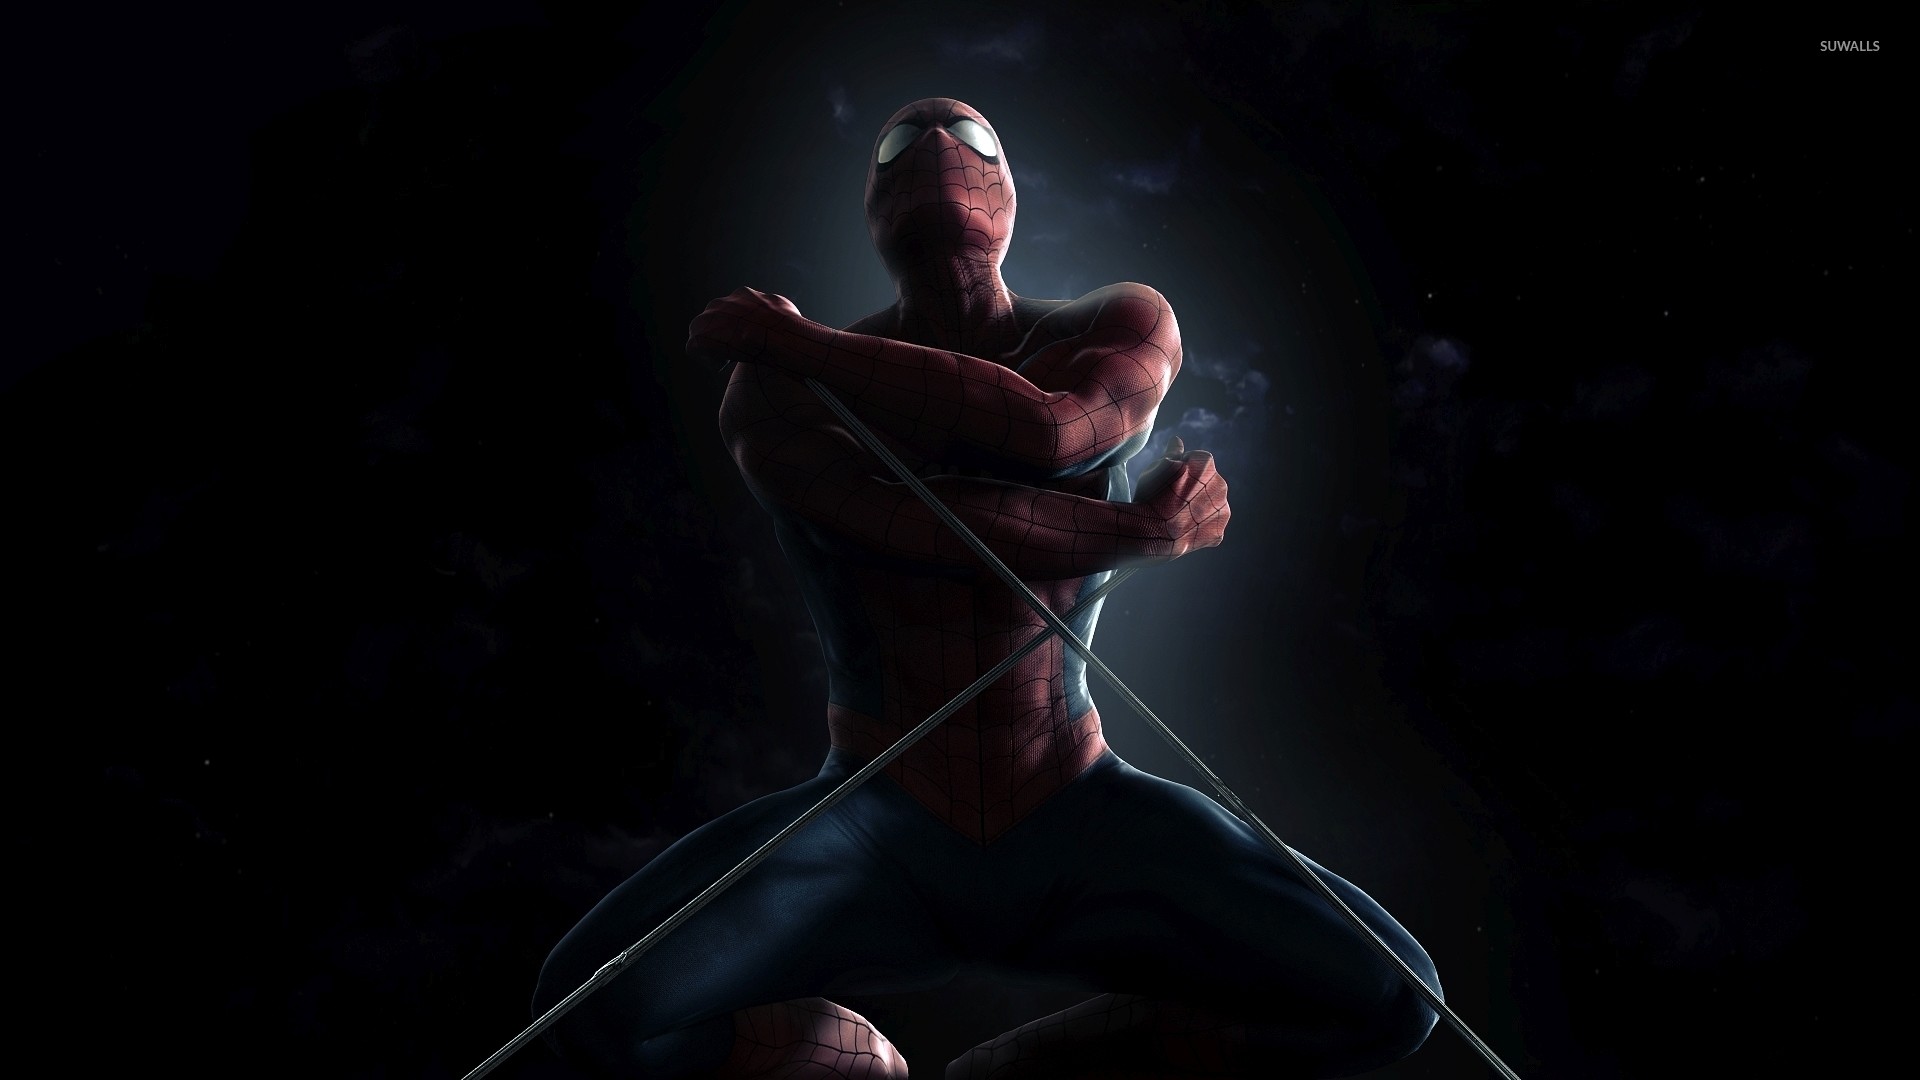 1920x1080 the amazing spider man poster iphone hd Desktop Backgrounds 1920Ã1080 The  Amazing Spiderman 2